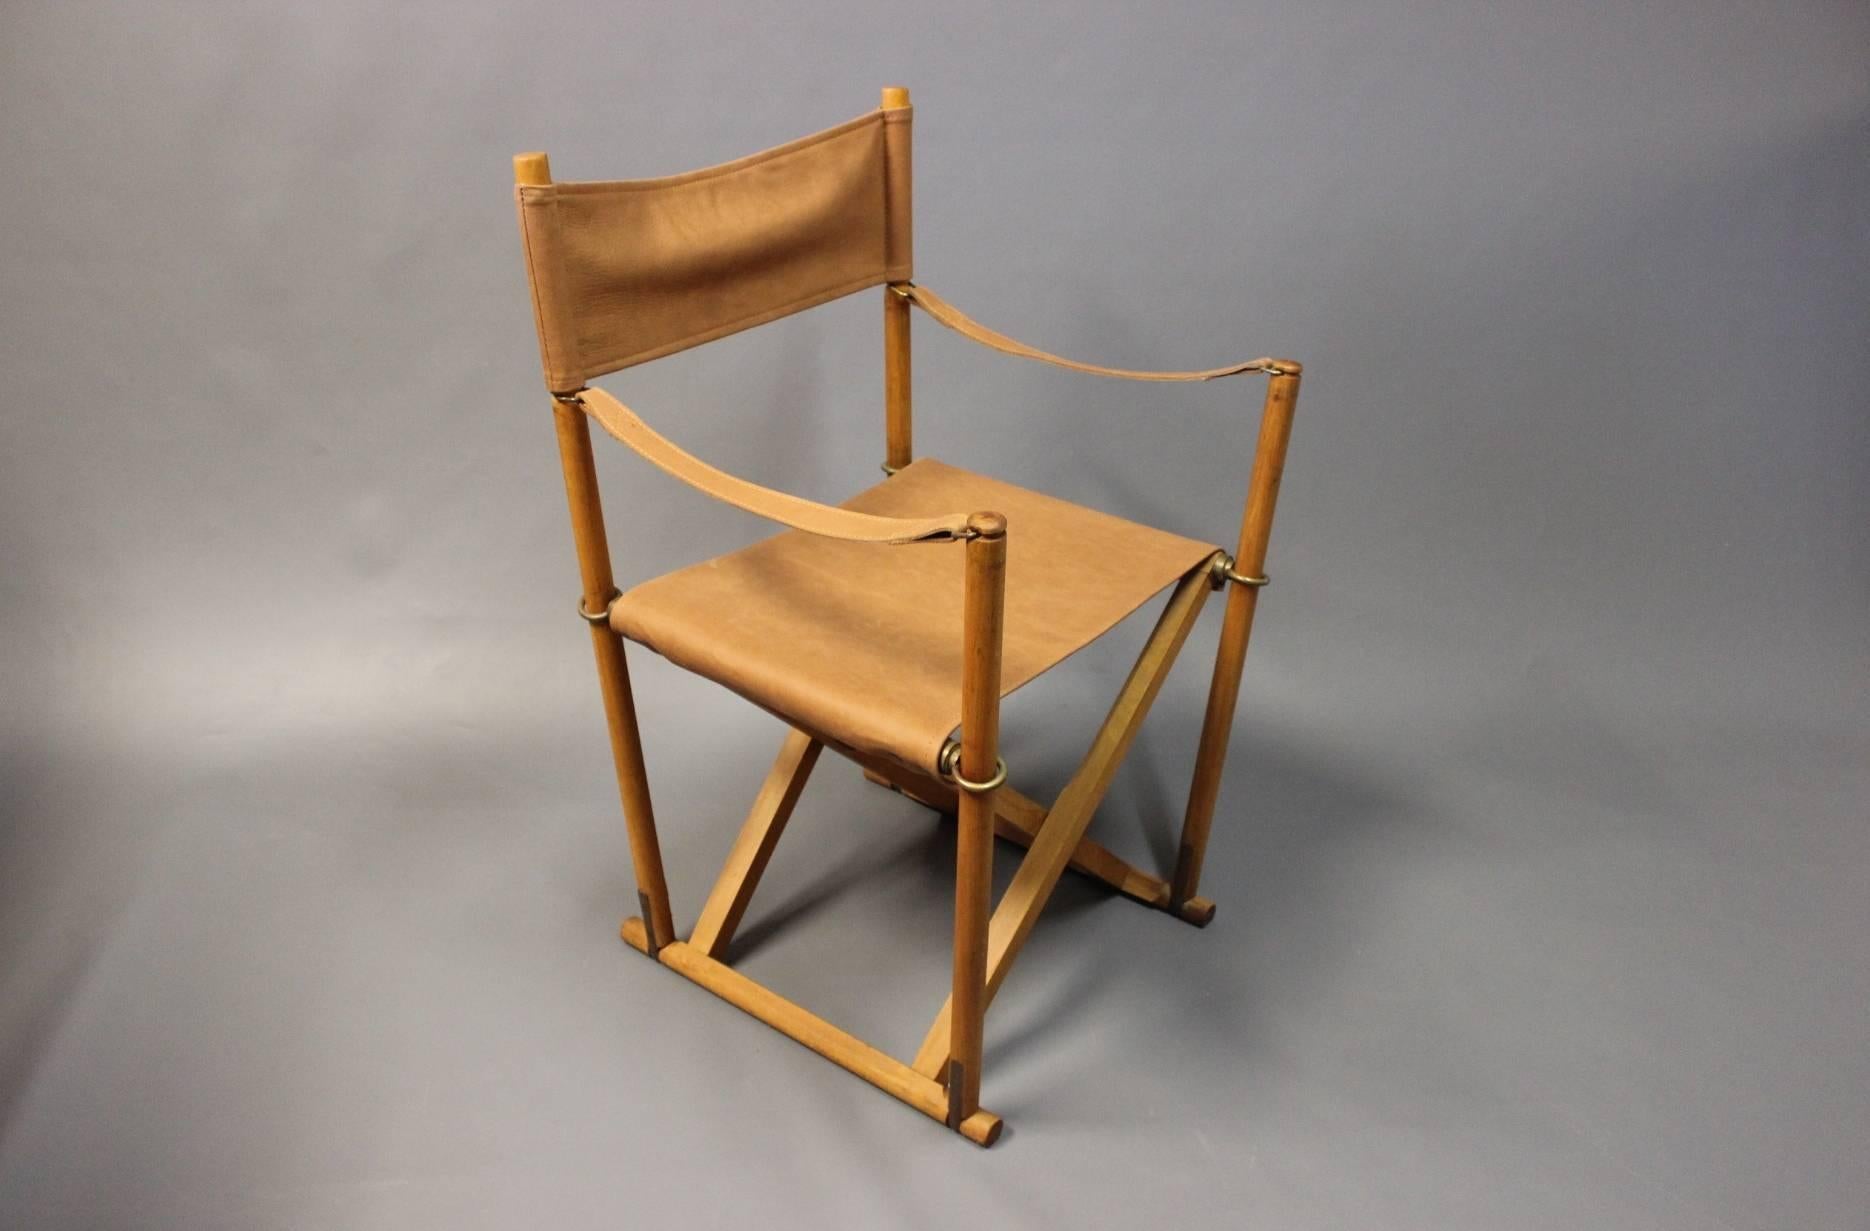 Three folding chairs, model MK99200, designed by Mogens Koch in 1932 and manufactured by Interna, Denmark, 1960s. The chairs are in polished beech, with brass rings and patinated leather seats.